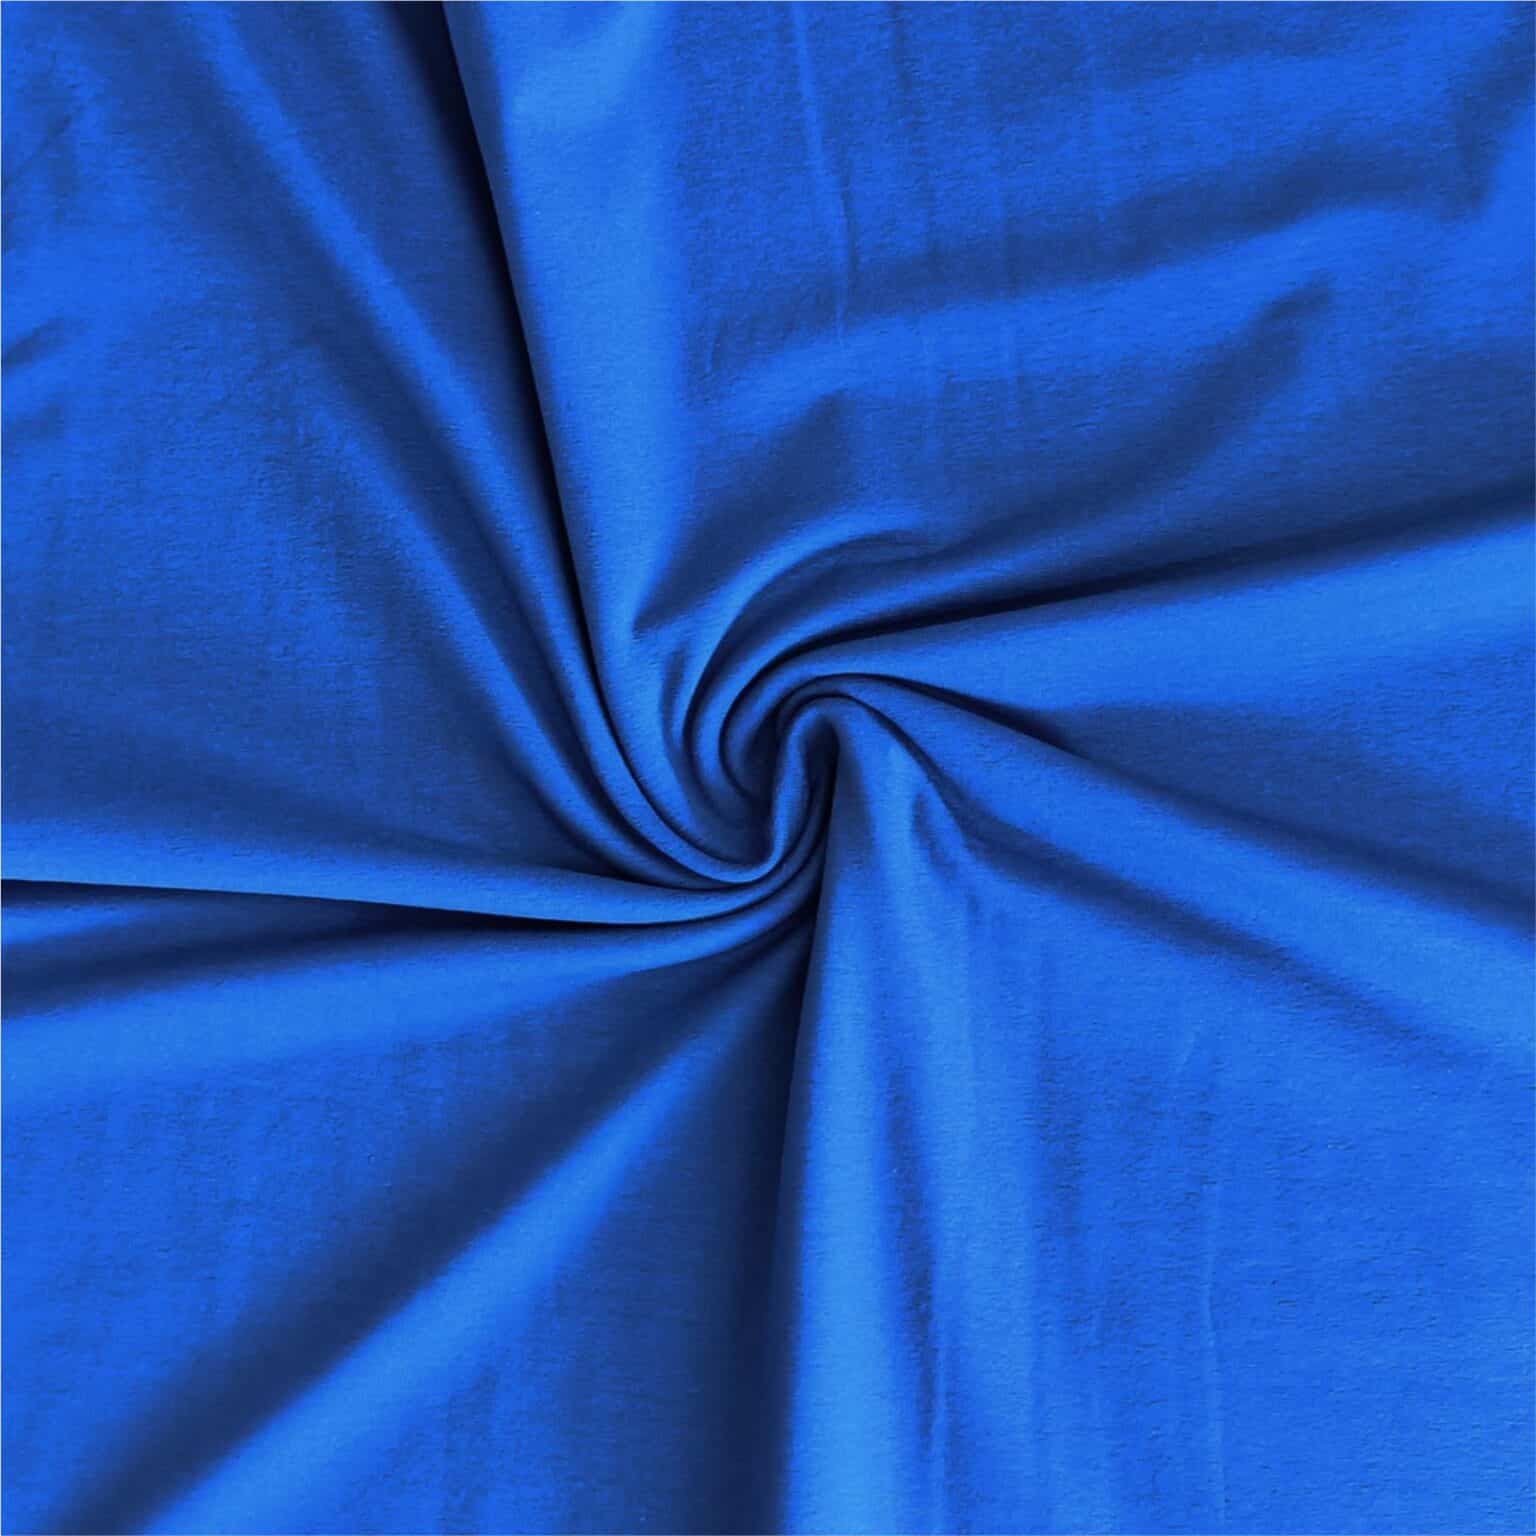 royal blue cotton plain jersey fabric | More Sewing